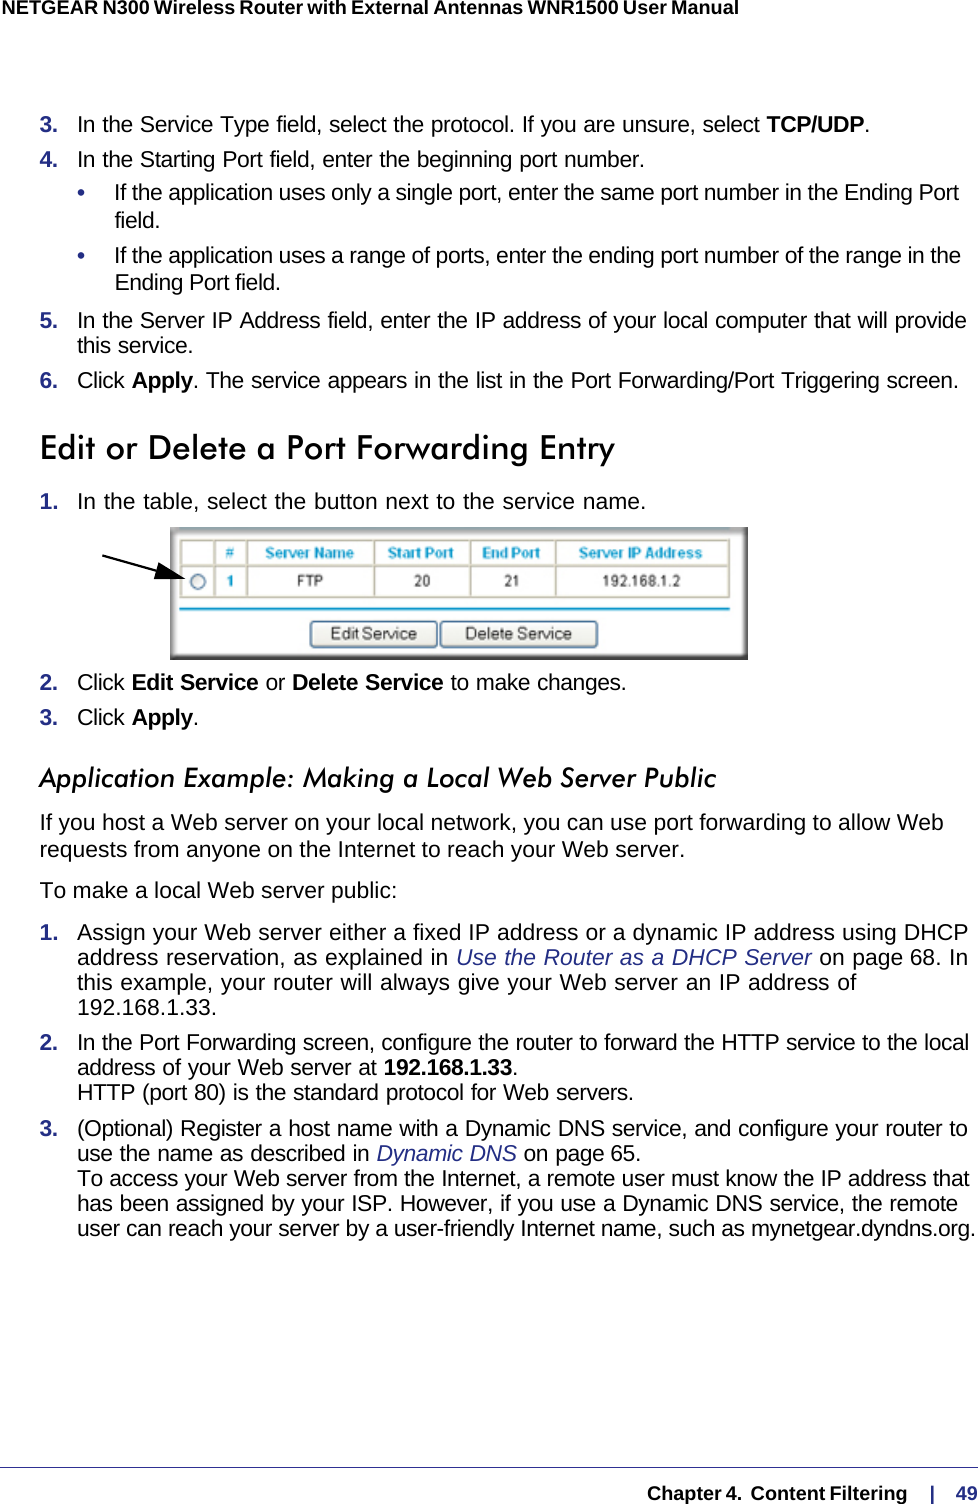   Chapter 4.  Content Filtering     |    49NETGEAR N300 Wireless Router with External Antennas WNR1500 User Manual 3.  In the Service Type field, select the protocol. If you are unsure, select TCP/UDP.4.  In the Starting Port field, enter the beginning port number. •     If the application uses only a single port, enter the same port number in the Ending Port field.•     If the application uses a range of ports, enter the ending port number of the range in the Ending Port field.5.  In the Server IP Address field, enter the IP address of your local computer that will provide this service.6.  Click Apply. The service appears in the list in the Port Forwarding/Port Triggering screen.Edit or Delete a Port Forwarding Entry1.  In the table, select the button next to the service name.2.  Click Edit Service or Delete Service to make changes.3.  Click Apply.Application Example: Making a Local Web Server PublicIf you host a Web server on your local network, you can use port forwarding to allow Web requests from anyone on the Internet to reach your Web server. To make a local Web server public:1.  Assign your Web server either a fixed IP address or a dynamic IP address using DHCP address reservation, as explained in Use the Router as a DHCP Server on page  68. In this example, your router will always give your Web server an IP address of 192.168.1.33. 2.  In the Port Forwarding screen, configure the router to forward the HTTP service to the local address of your Web server at 192.168.1.33.  HTTP (port 80) is the standard protocol for Web servers.3.  (Optional) Register a host name with a Dynamic DNS service, and configure your router to use the name as described in Dynamic DNS on page 65.  To access your Web server from the Internet, a remote user must know the IP address that has been assigned by your ISP. However, if you use a Dynamic DNS service, the remote user can reach your server by a user-friendly Internet name, such as mynetgear.dyndns.org.